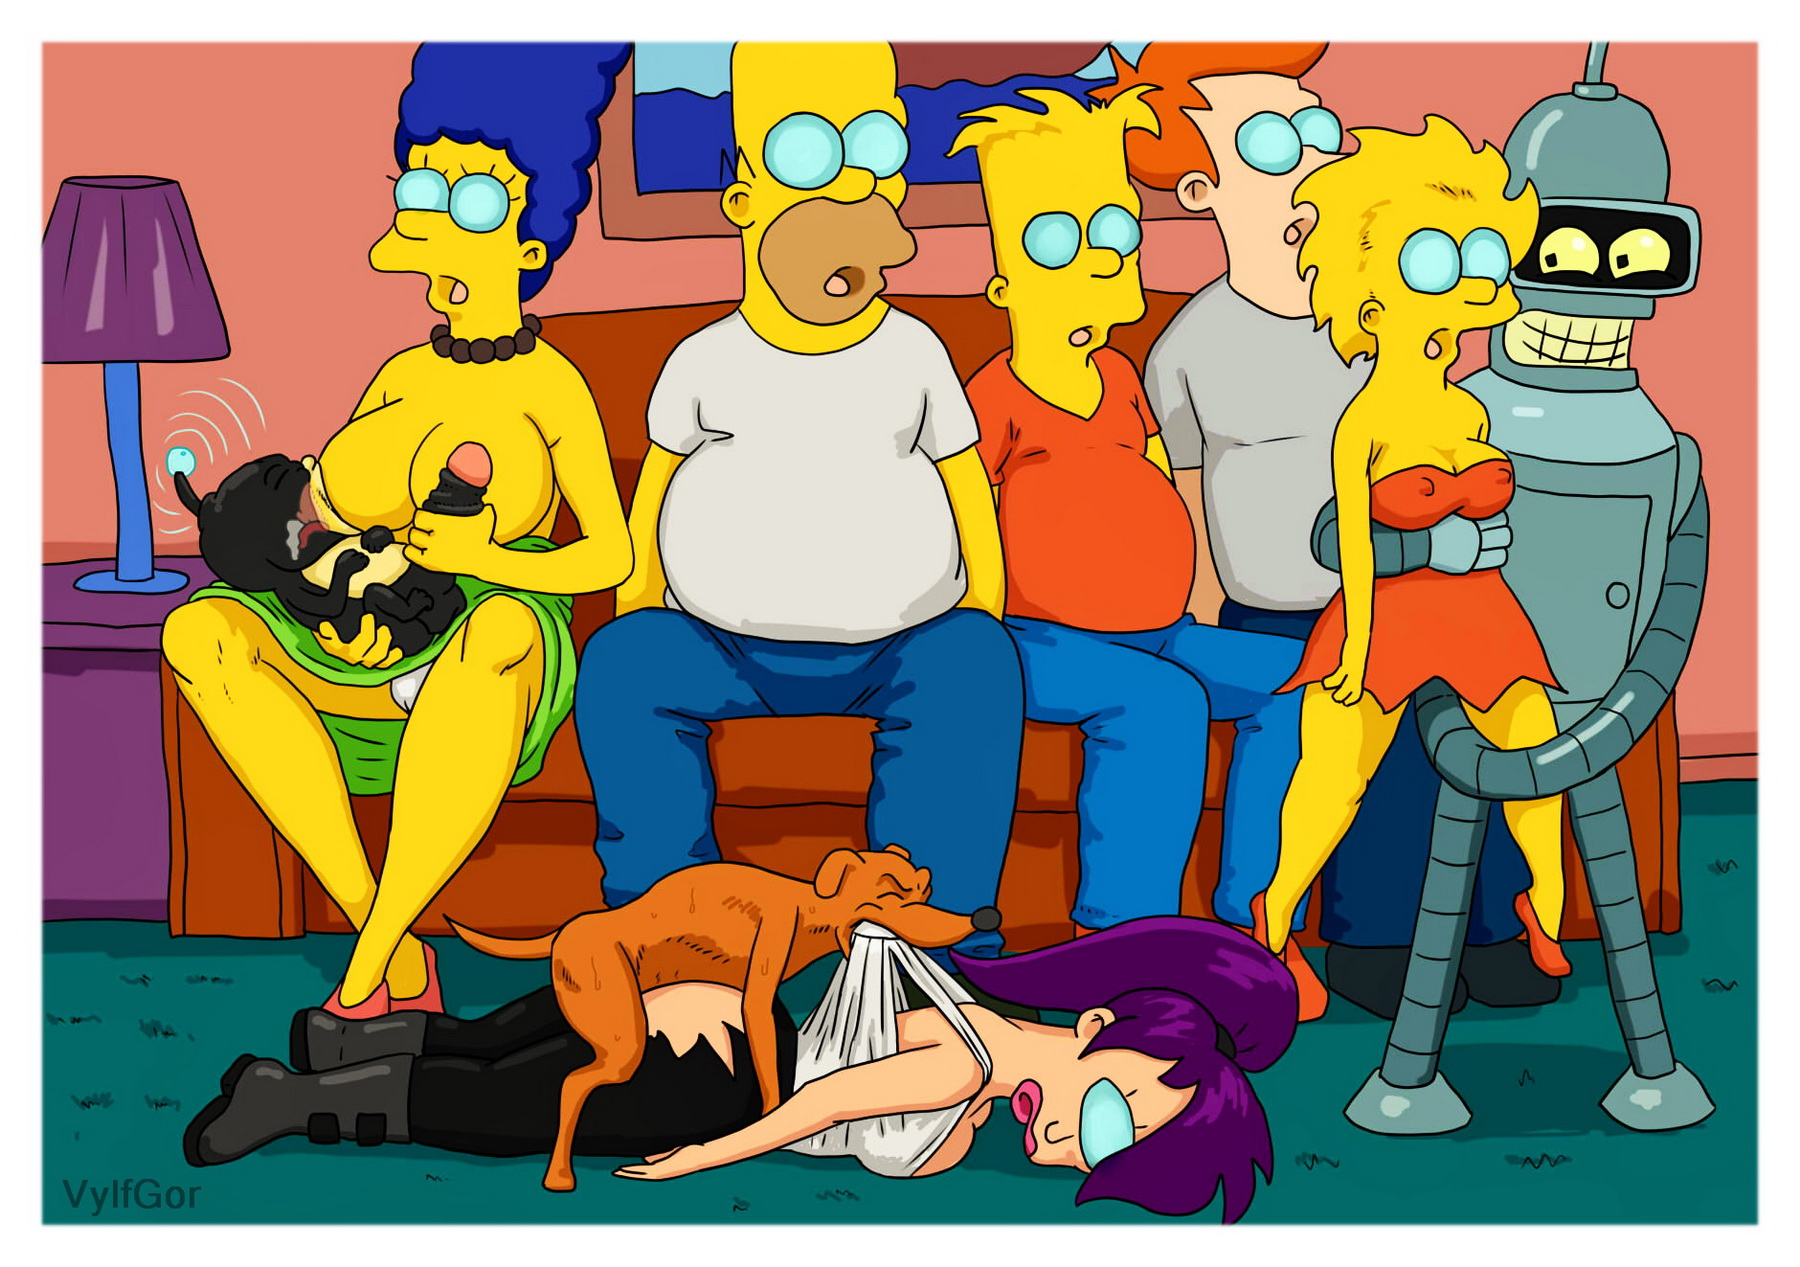 chika dziekan recommends The Simpsons Rule 34